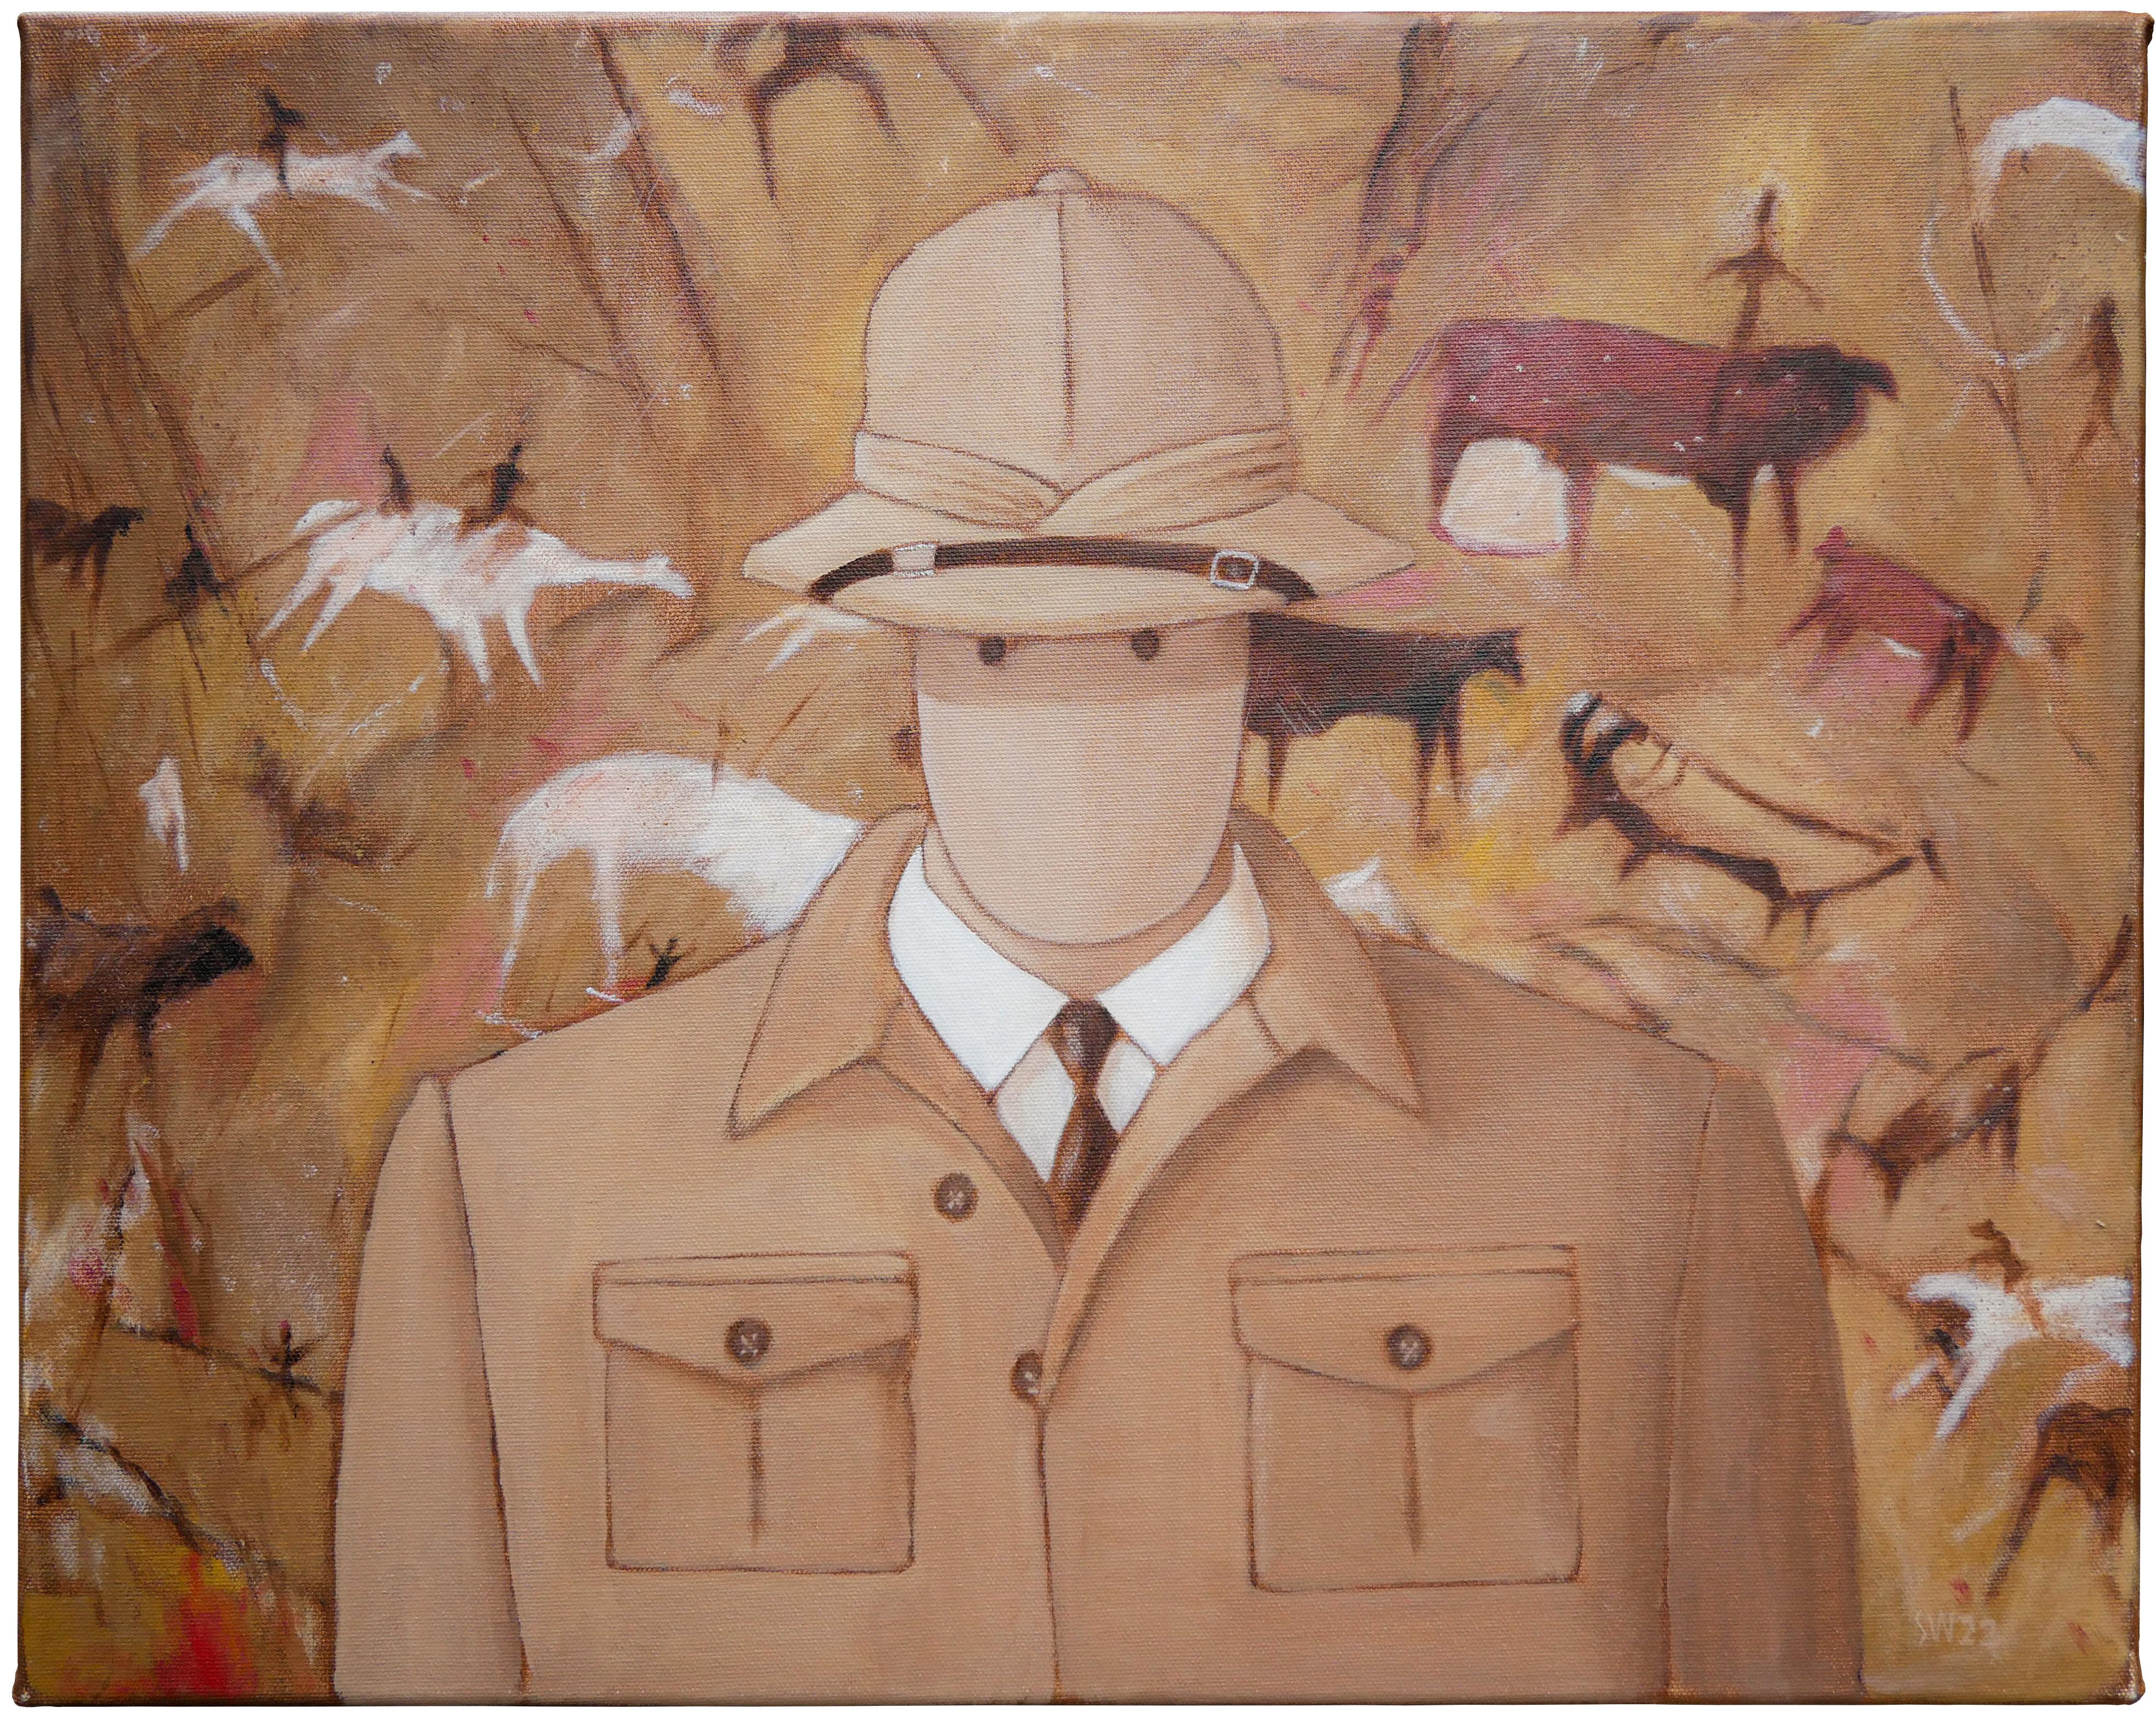 Scott Woodard Abstract Painting - “Lascaux Khaki” Brown Abstract Figurative Contemporary Painting